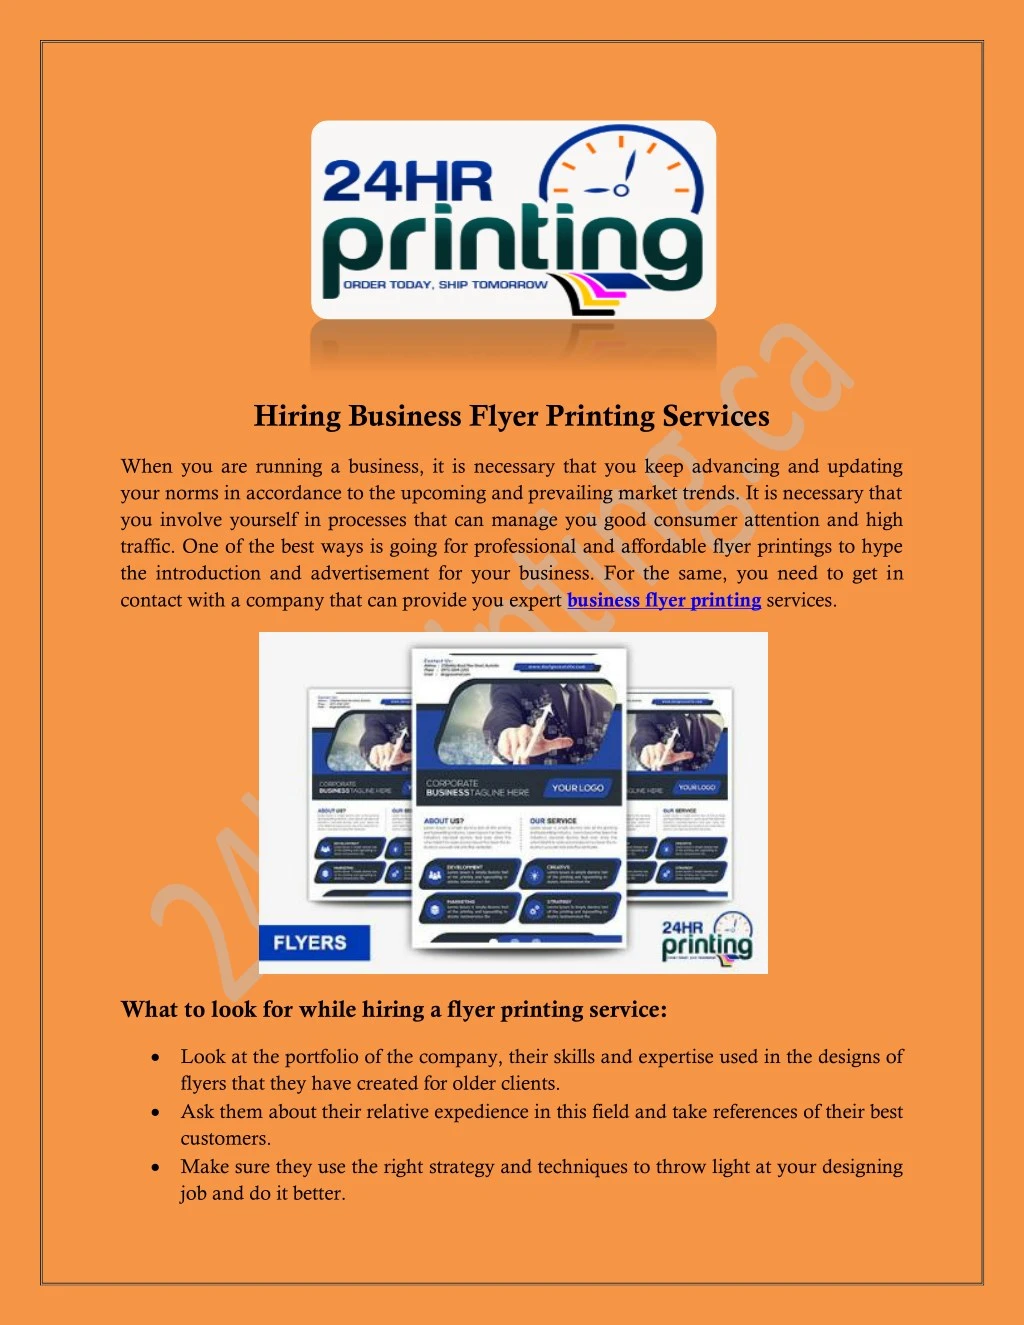 hiring business flyer printing services